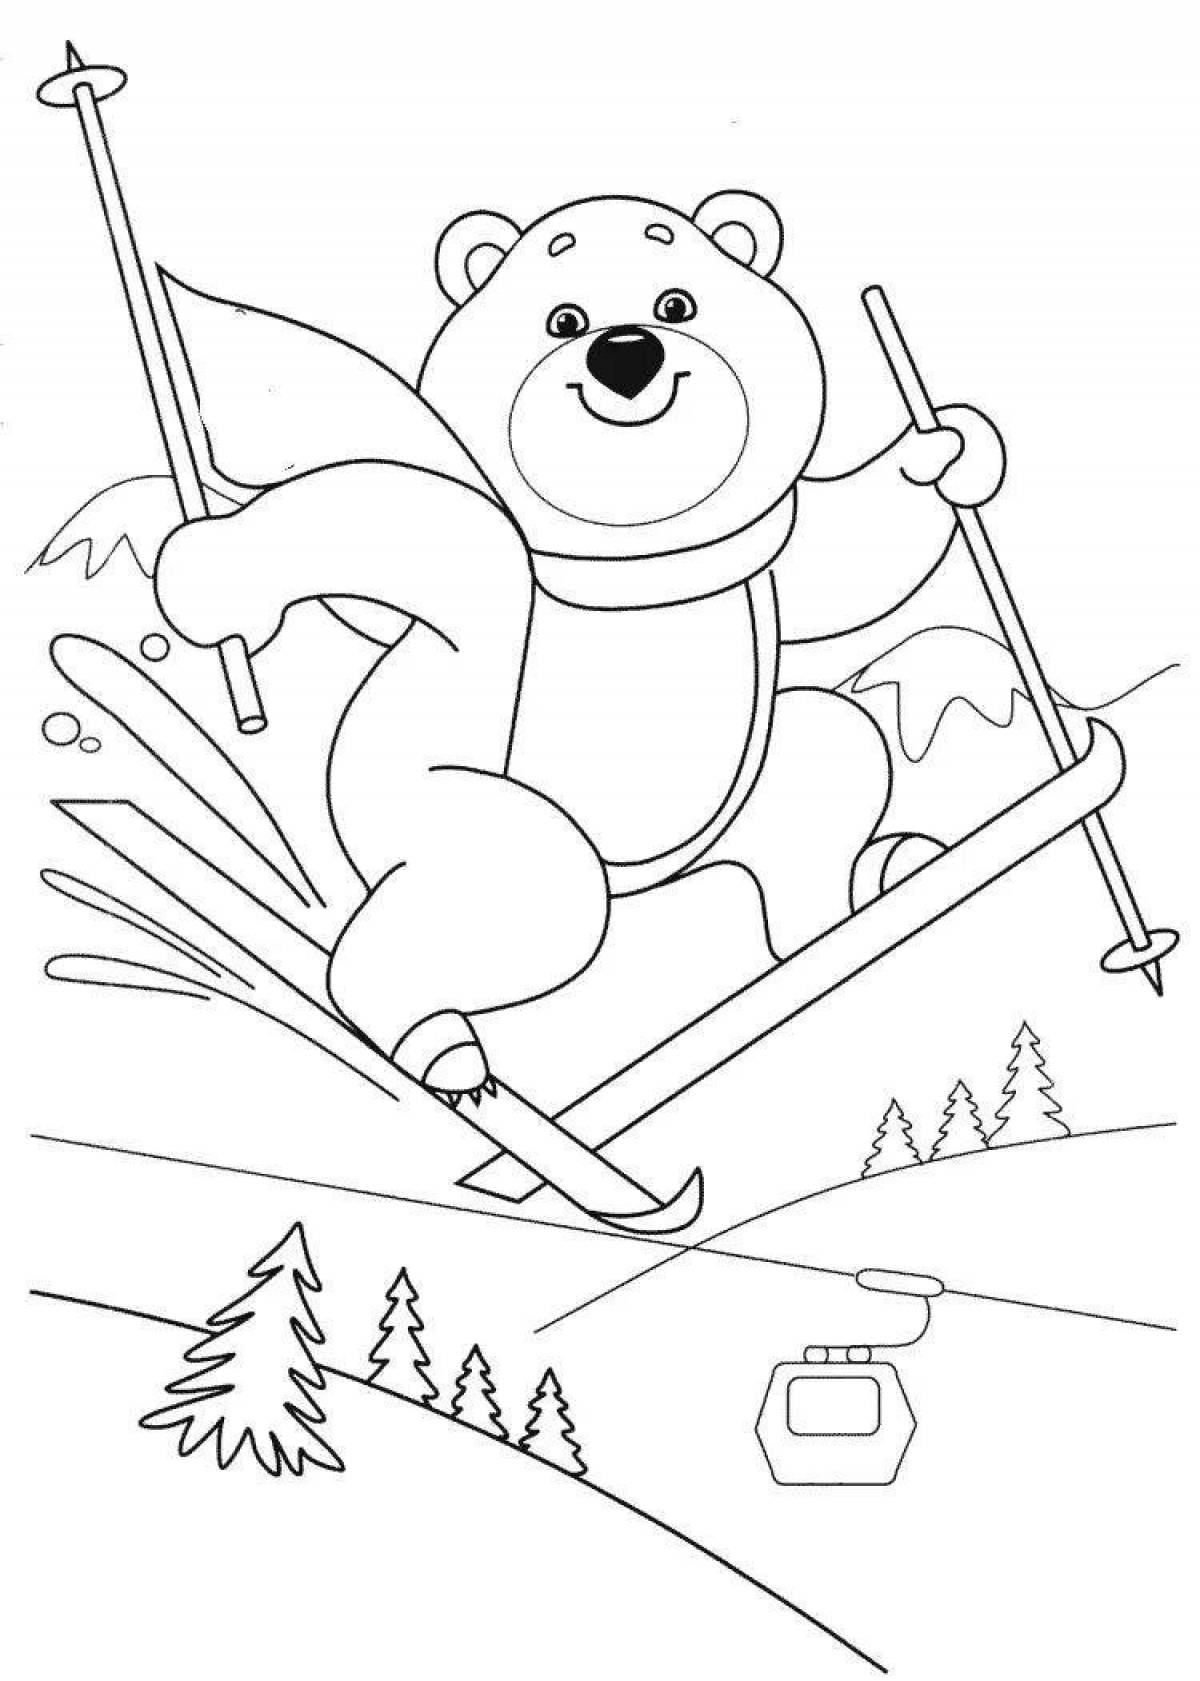 Exciting coloring book for kids winter sports